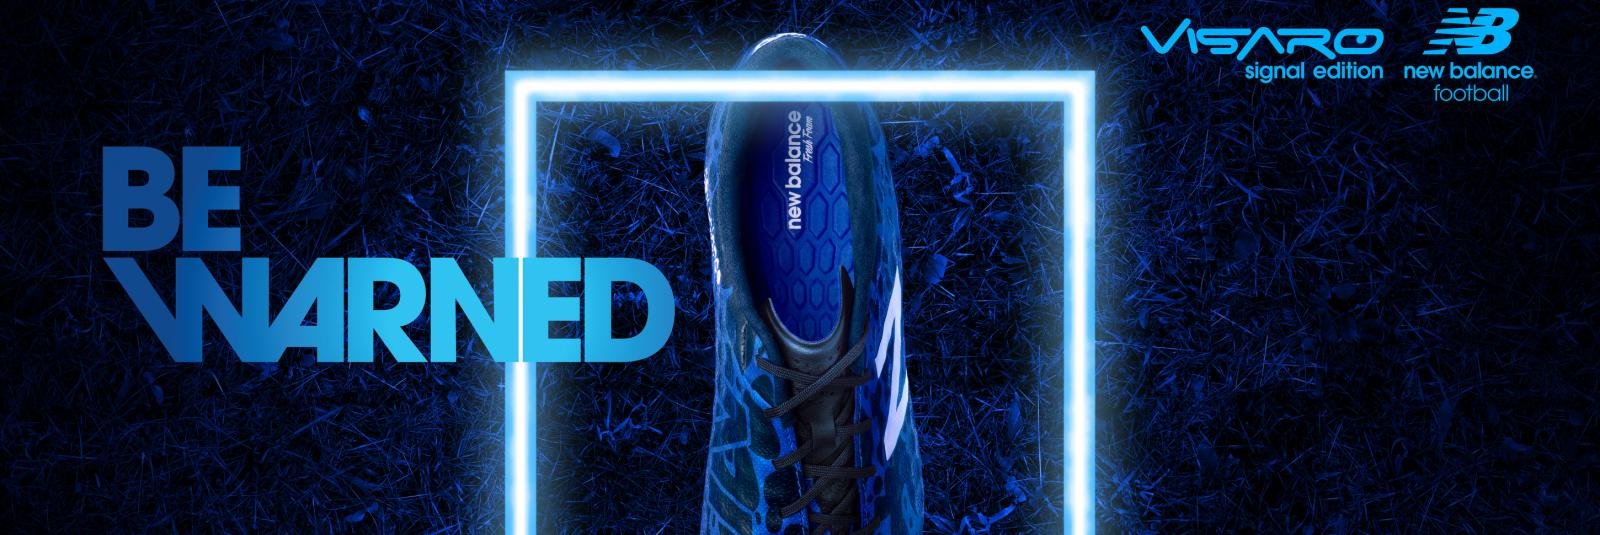 Arsenal and Manchester United stars to show off New Balance’s Visaro boots